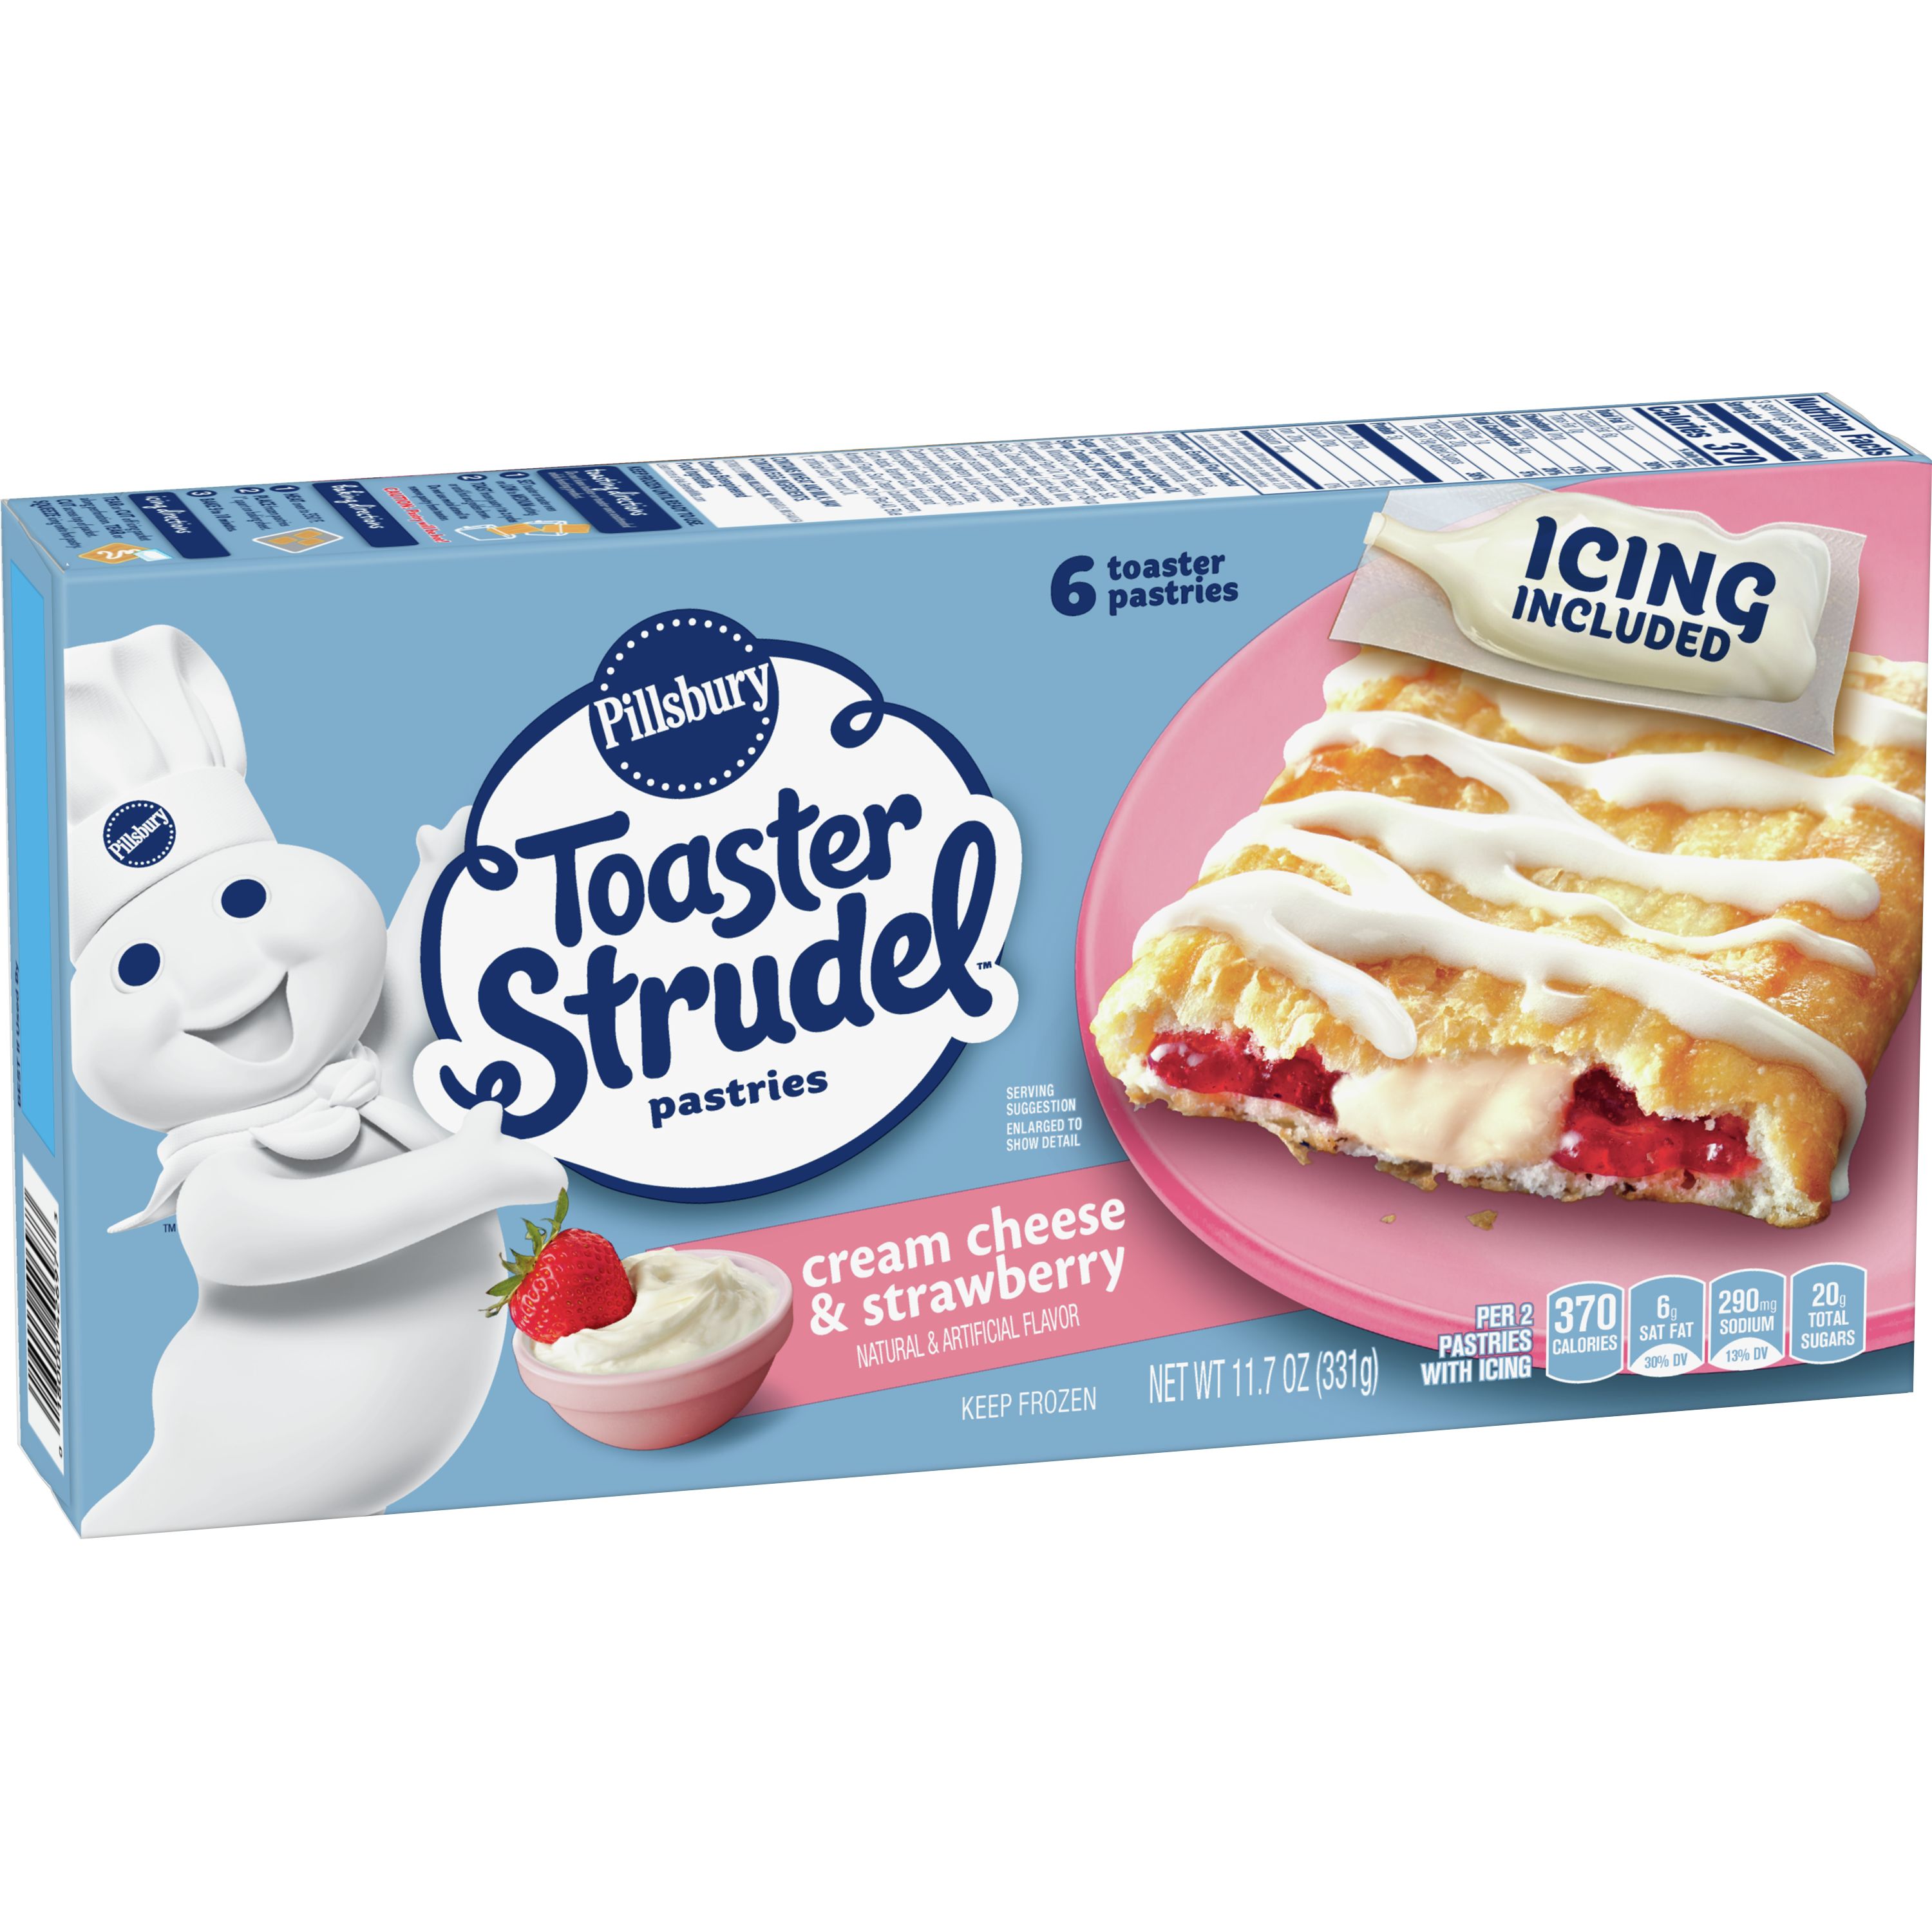 Calories In Toaster Strudel.